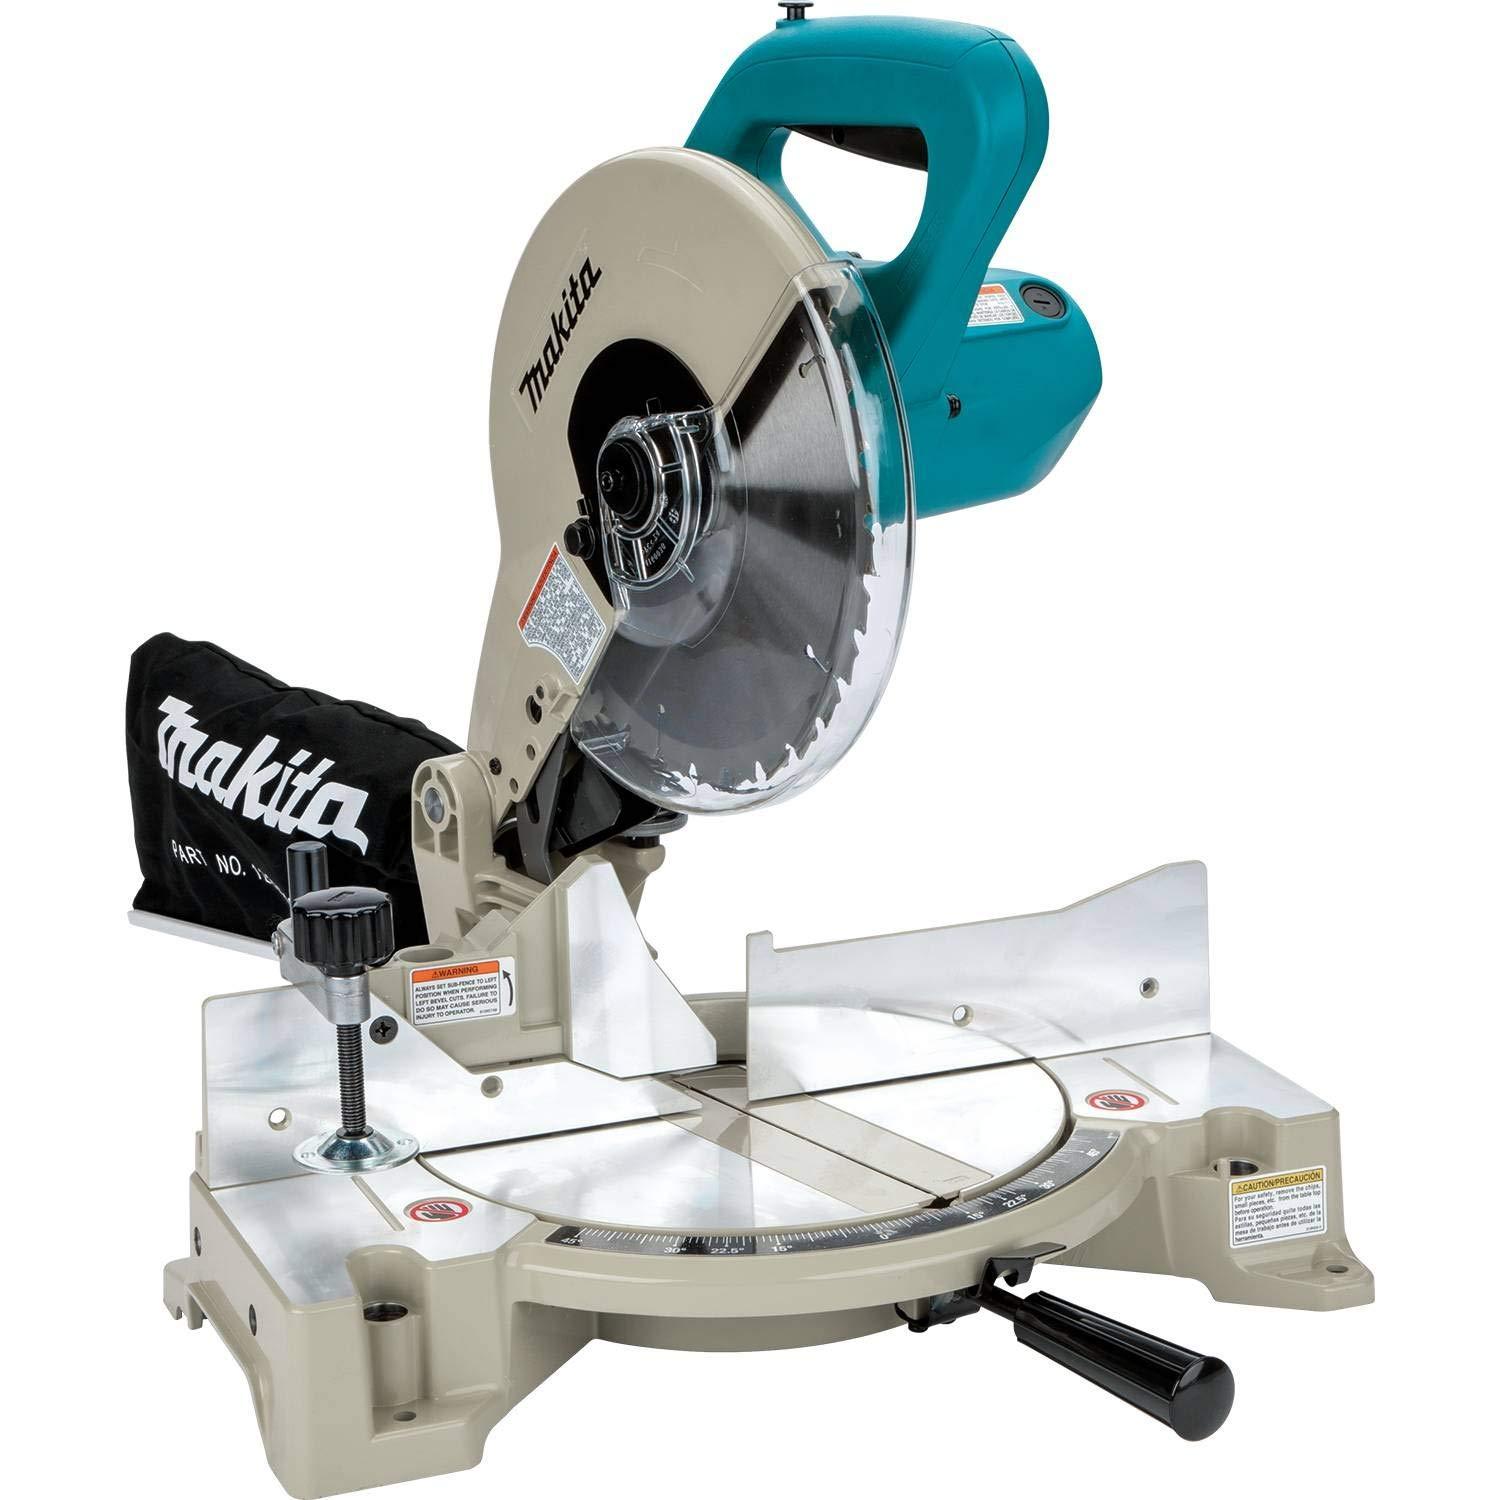 Primary image for 10" Compound Miter Saw, Ls1040 10" Compound Miter Saw